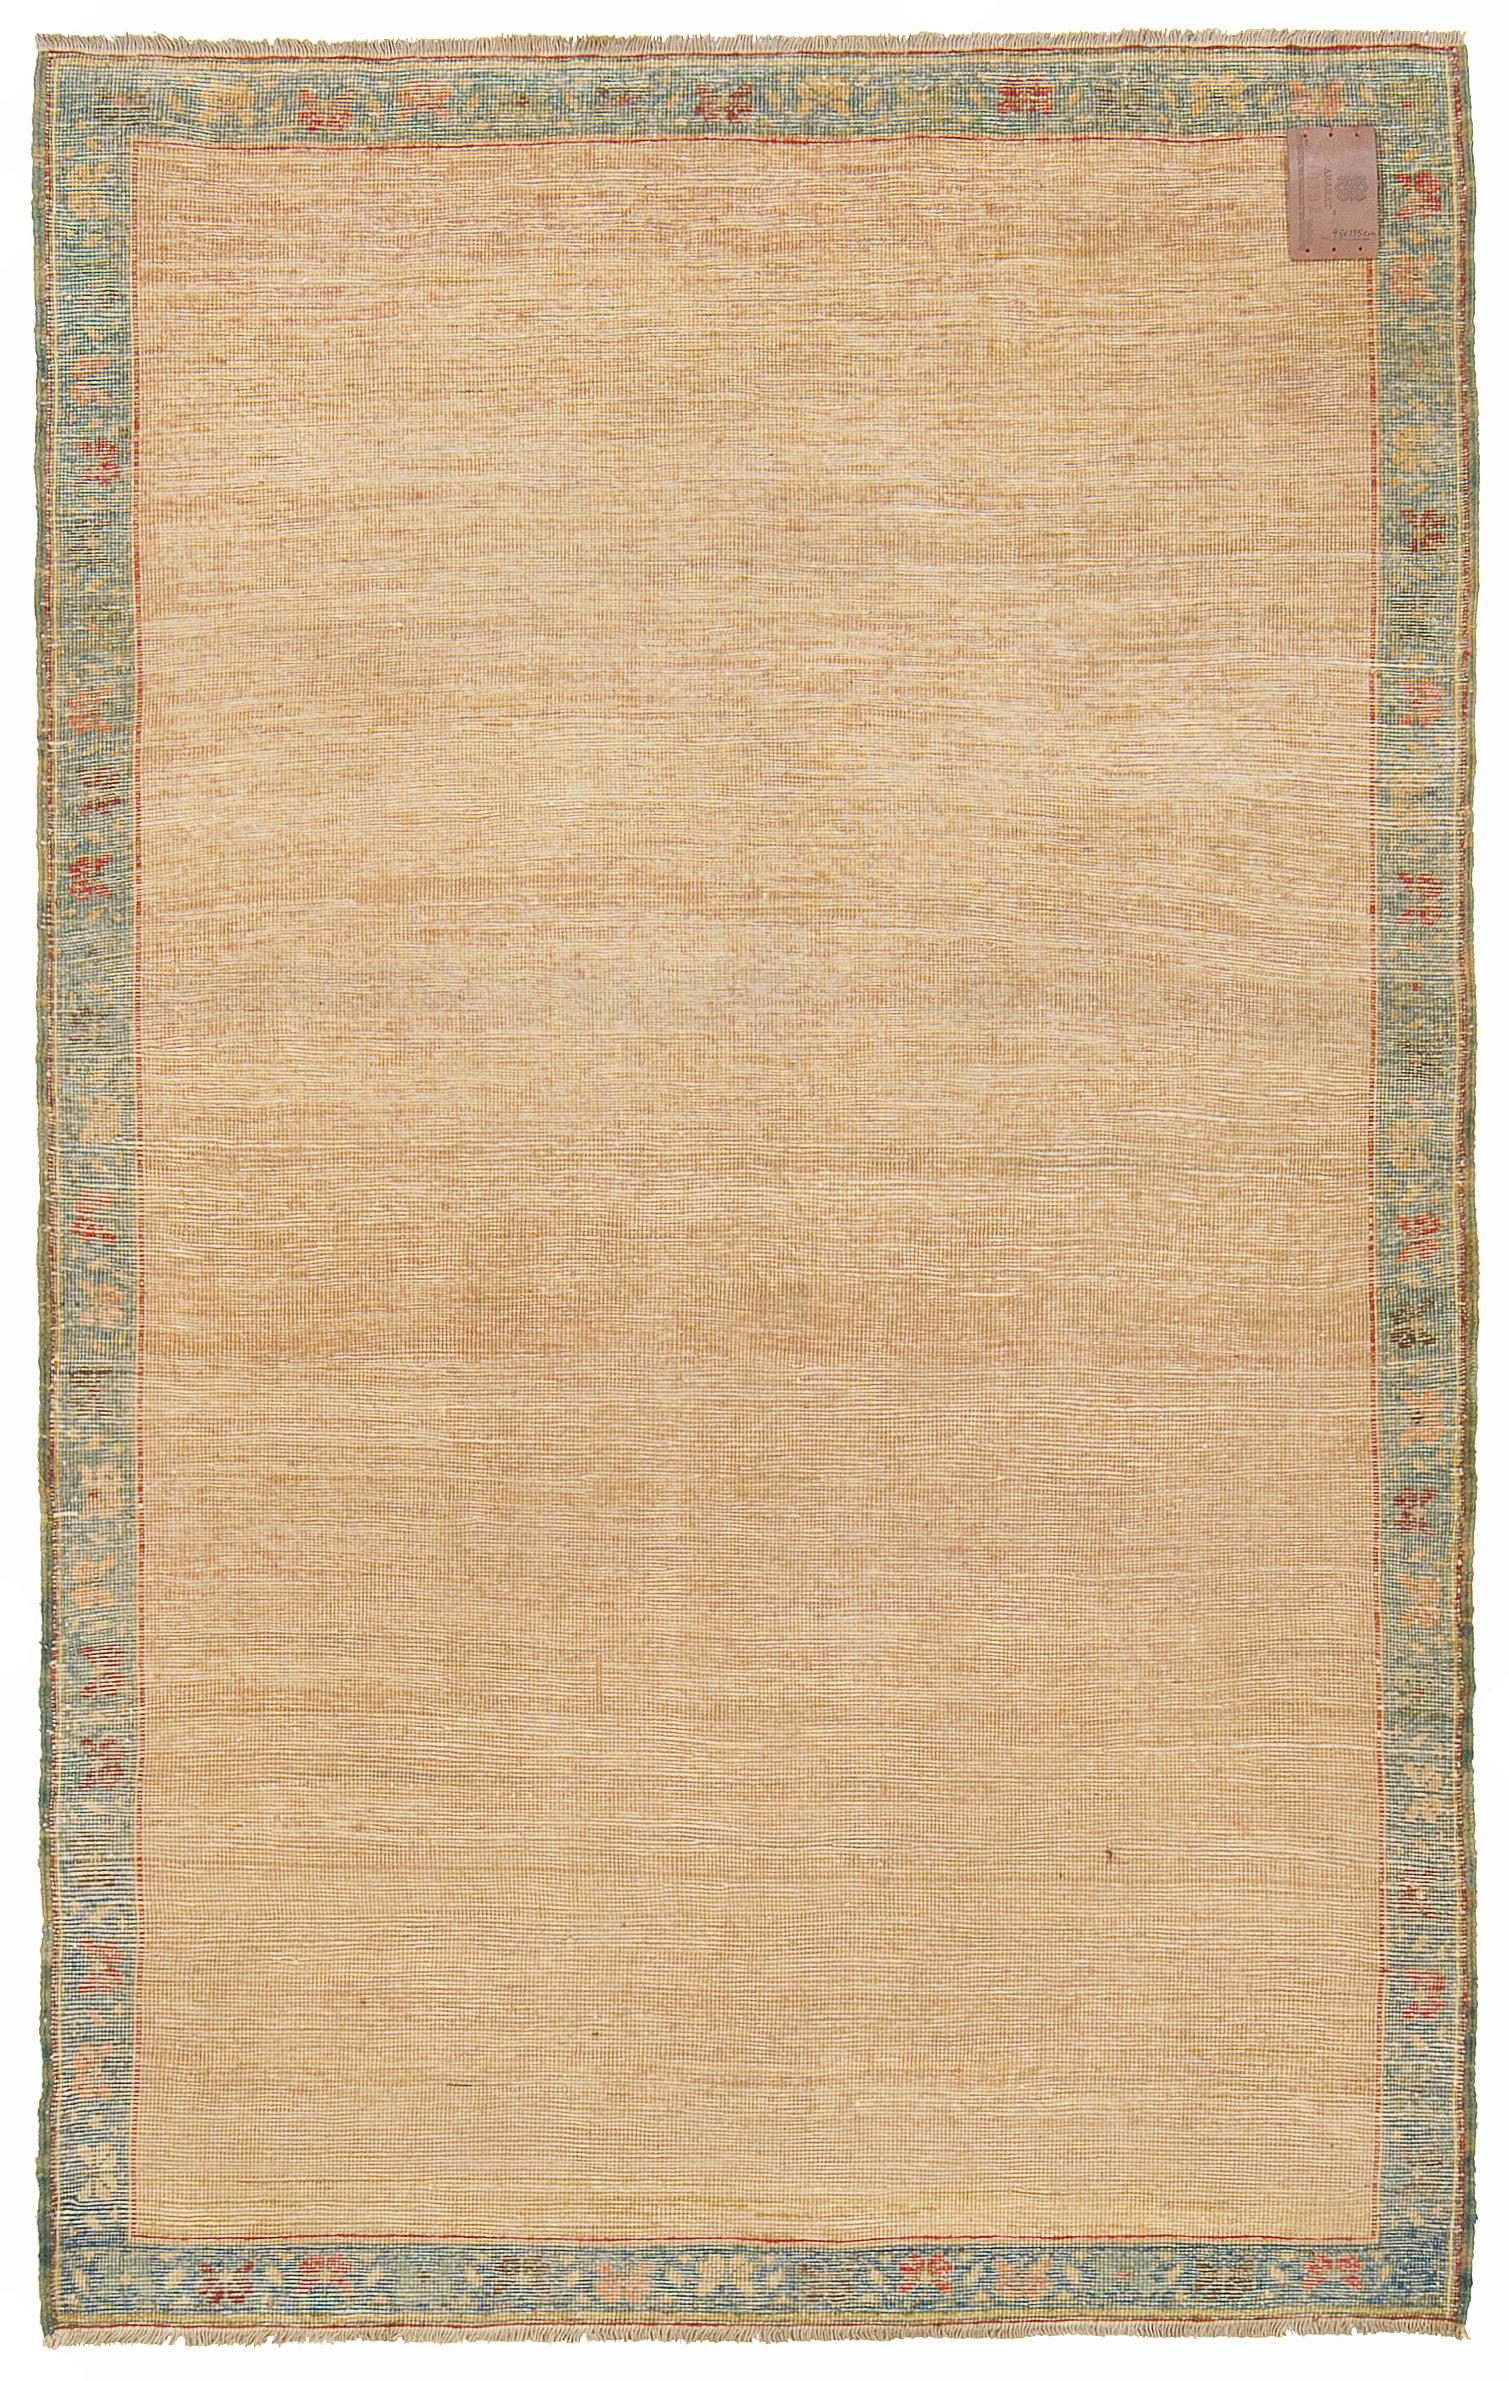 This unique design rug is interpreted by our designers with a mixture of Ararat Rugs’ soft tone natural dyed hand-spun yarns.
This modern carpet is looking like the sand in the desert.

Color summary: 10 colors in total, most used 4 colors